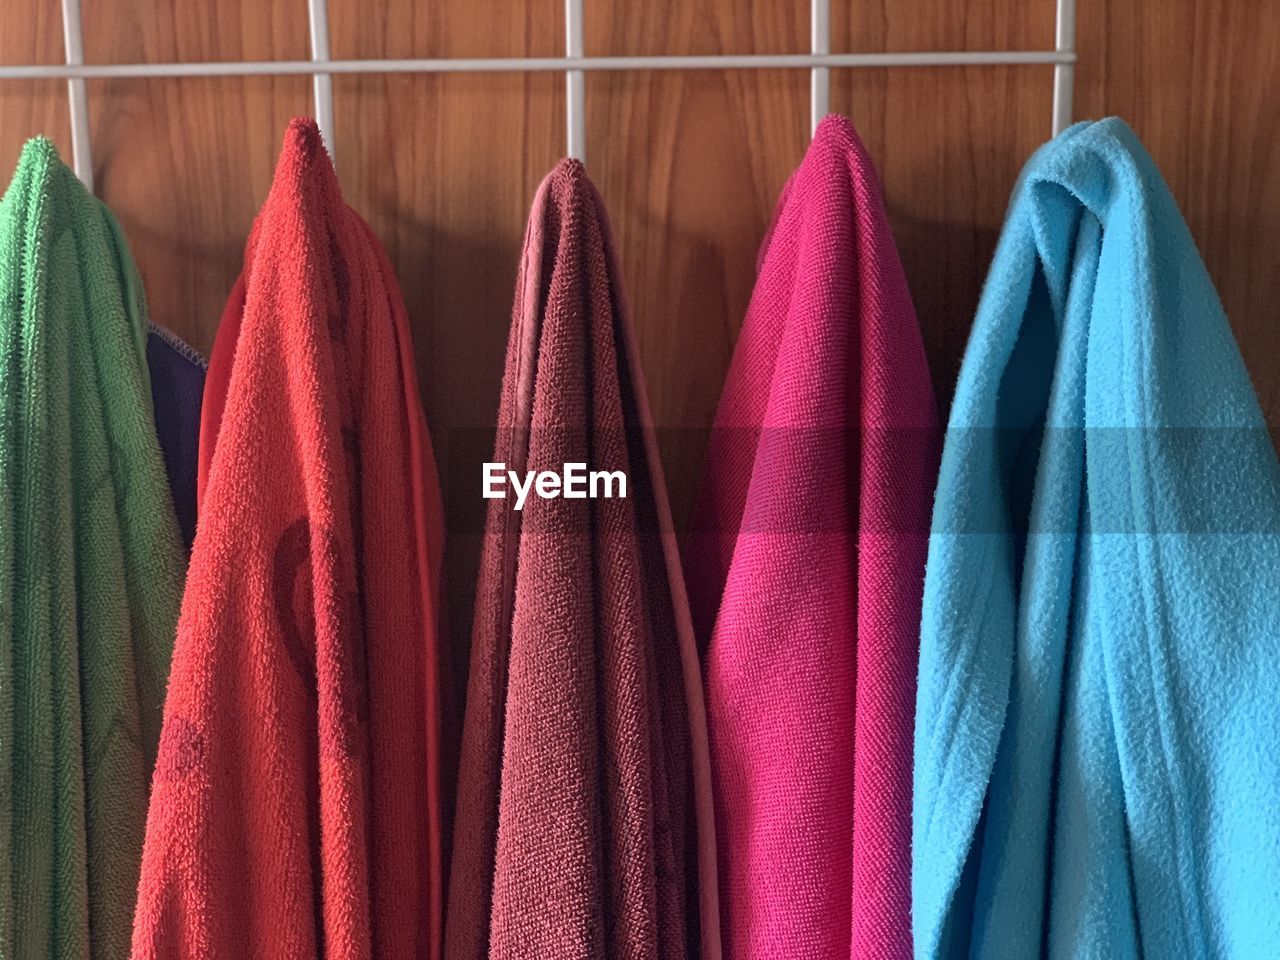 Colorful towels hanging on rack